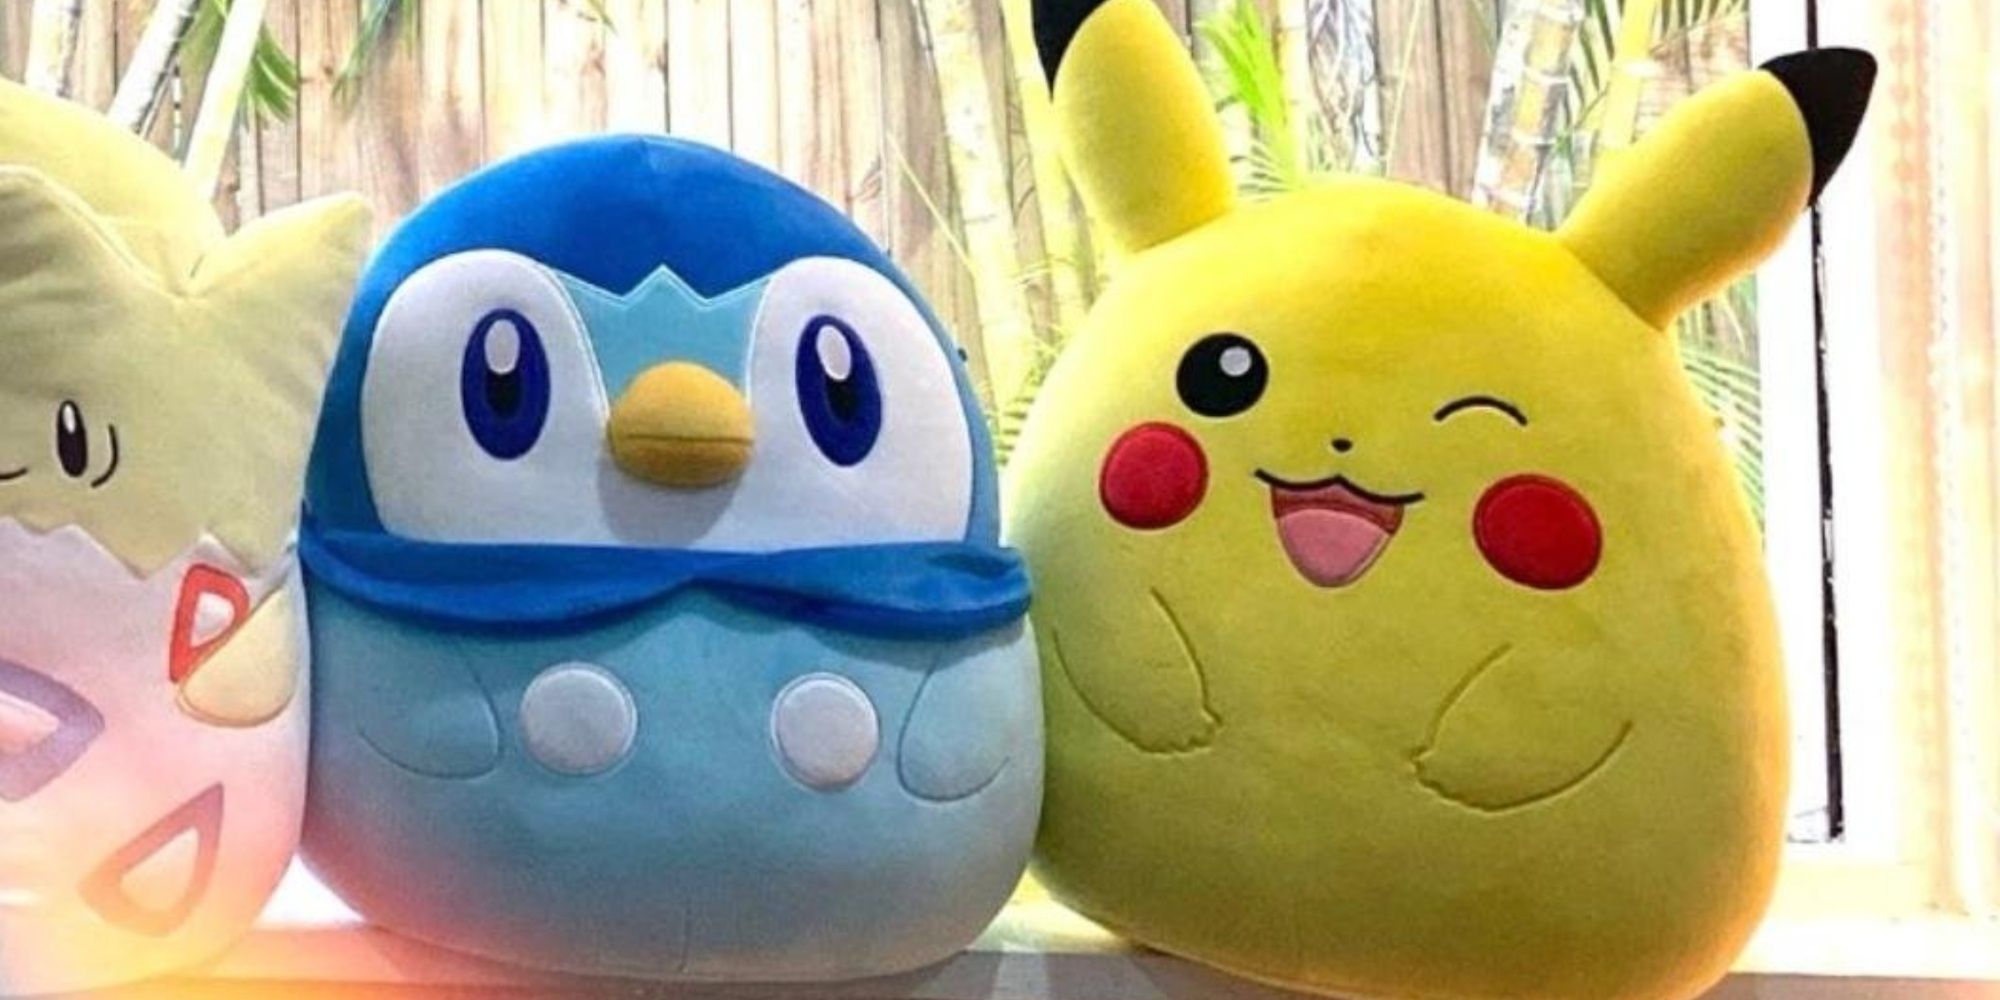 piplup and wining pikachu squishmallows on a window sill